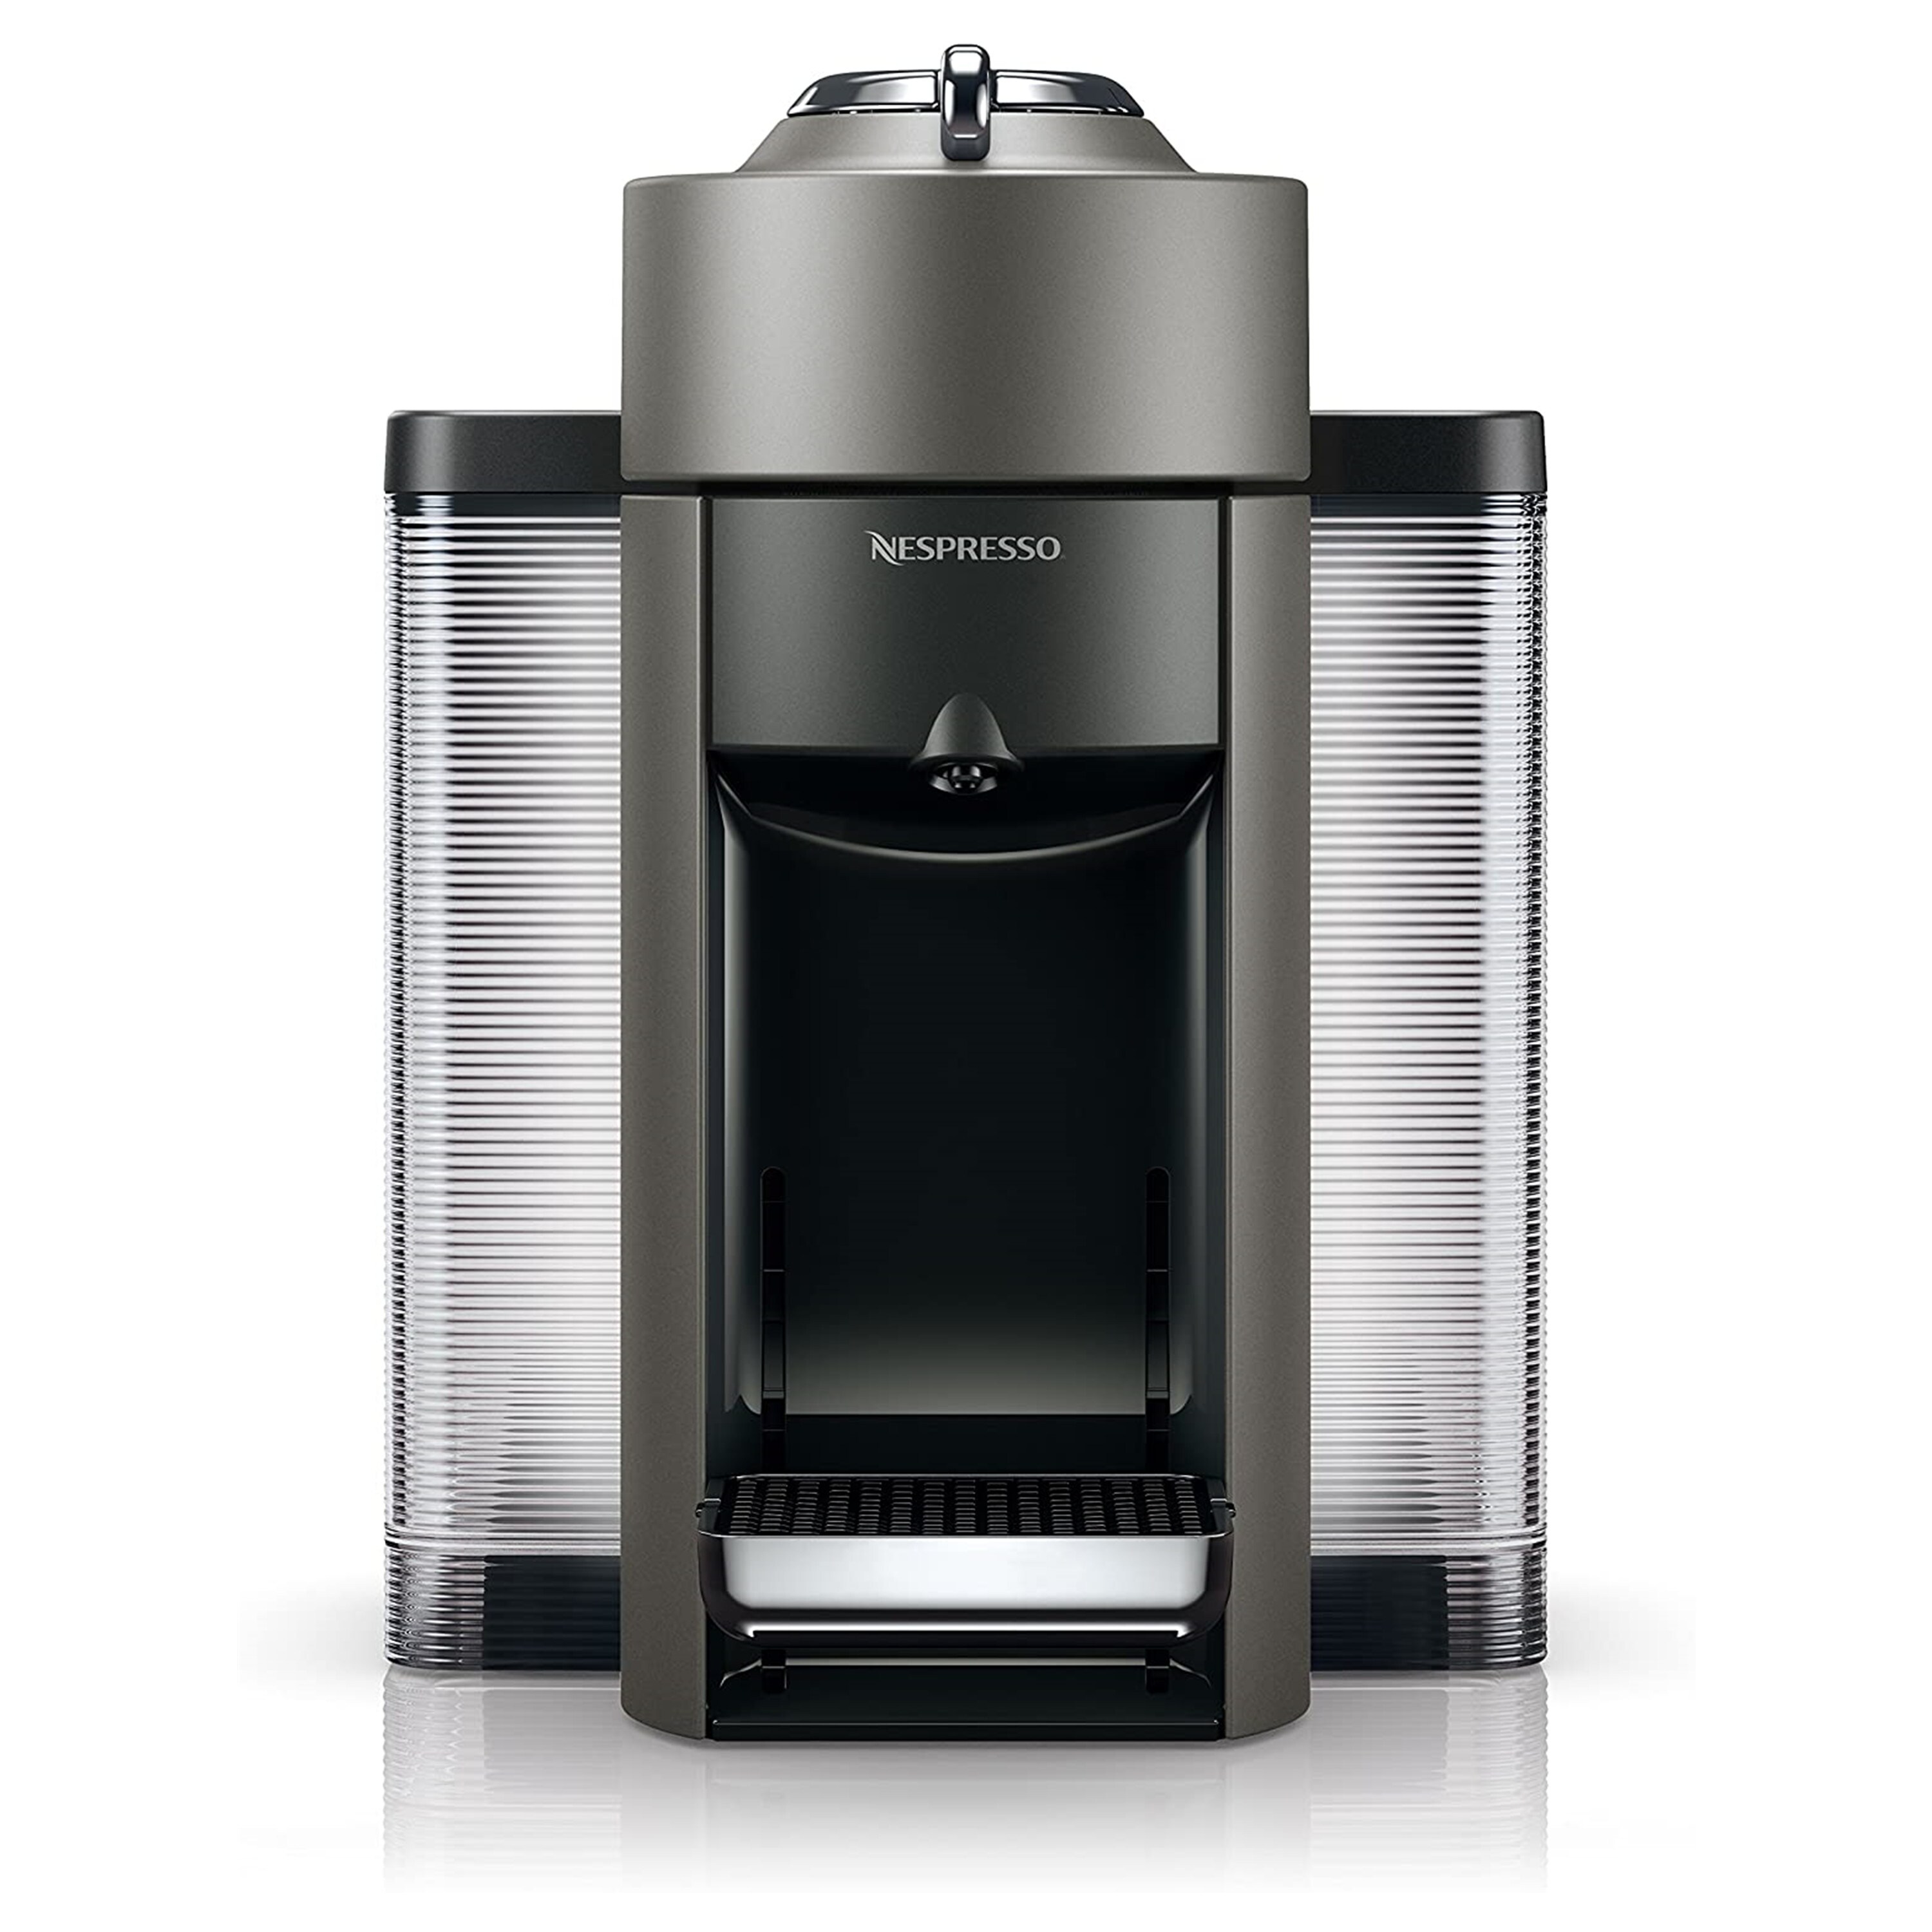 Nespresso: Get 24% off top-rated machines at Bed Bath and Beyond